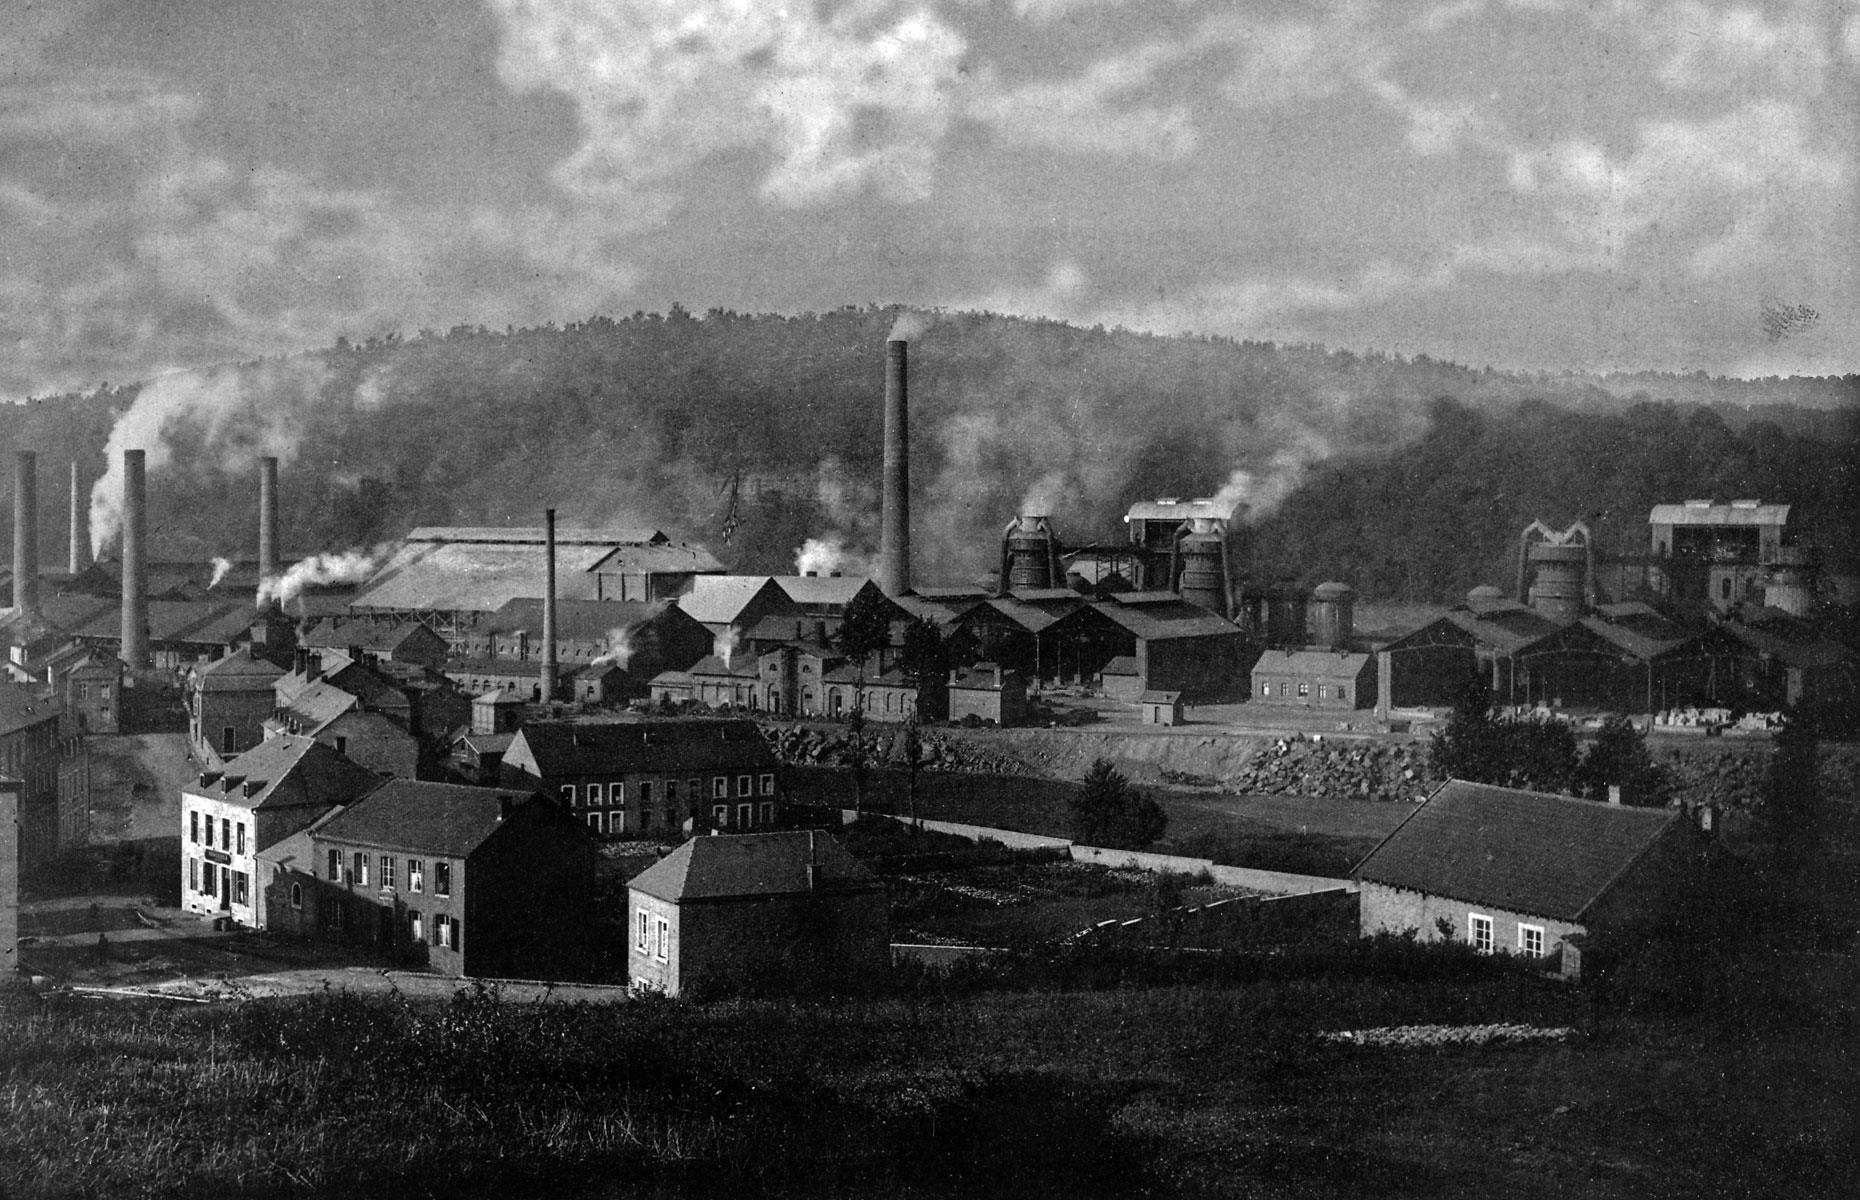 <p>The discovery of significant reserves of iron ore in the mid-19th century changed Luxembourg's fortunes almost overnight. Mines and factories sprung up, and the country's lucrative steel industry was born. By the end of the 19th century, Luxembourg had become one of Europe's leading steel producers.</p>  <p>The steel industry thrived, and jobs abounded throughout the 20th century, except during the two world wars. Luxembourg developed banking and advanced manufacturing industries in the 1960s, and since then the economy has been in excellent shape, enriching the compact country massively.</p>